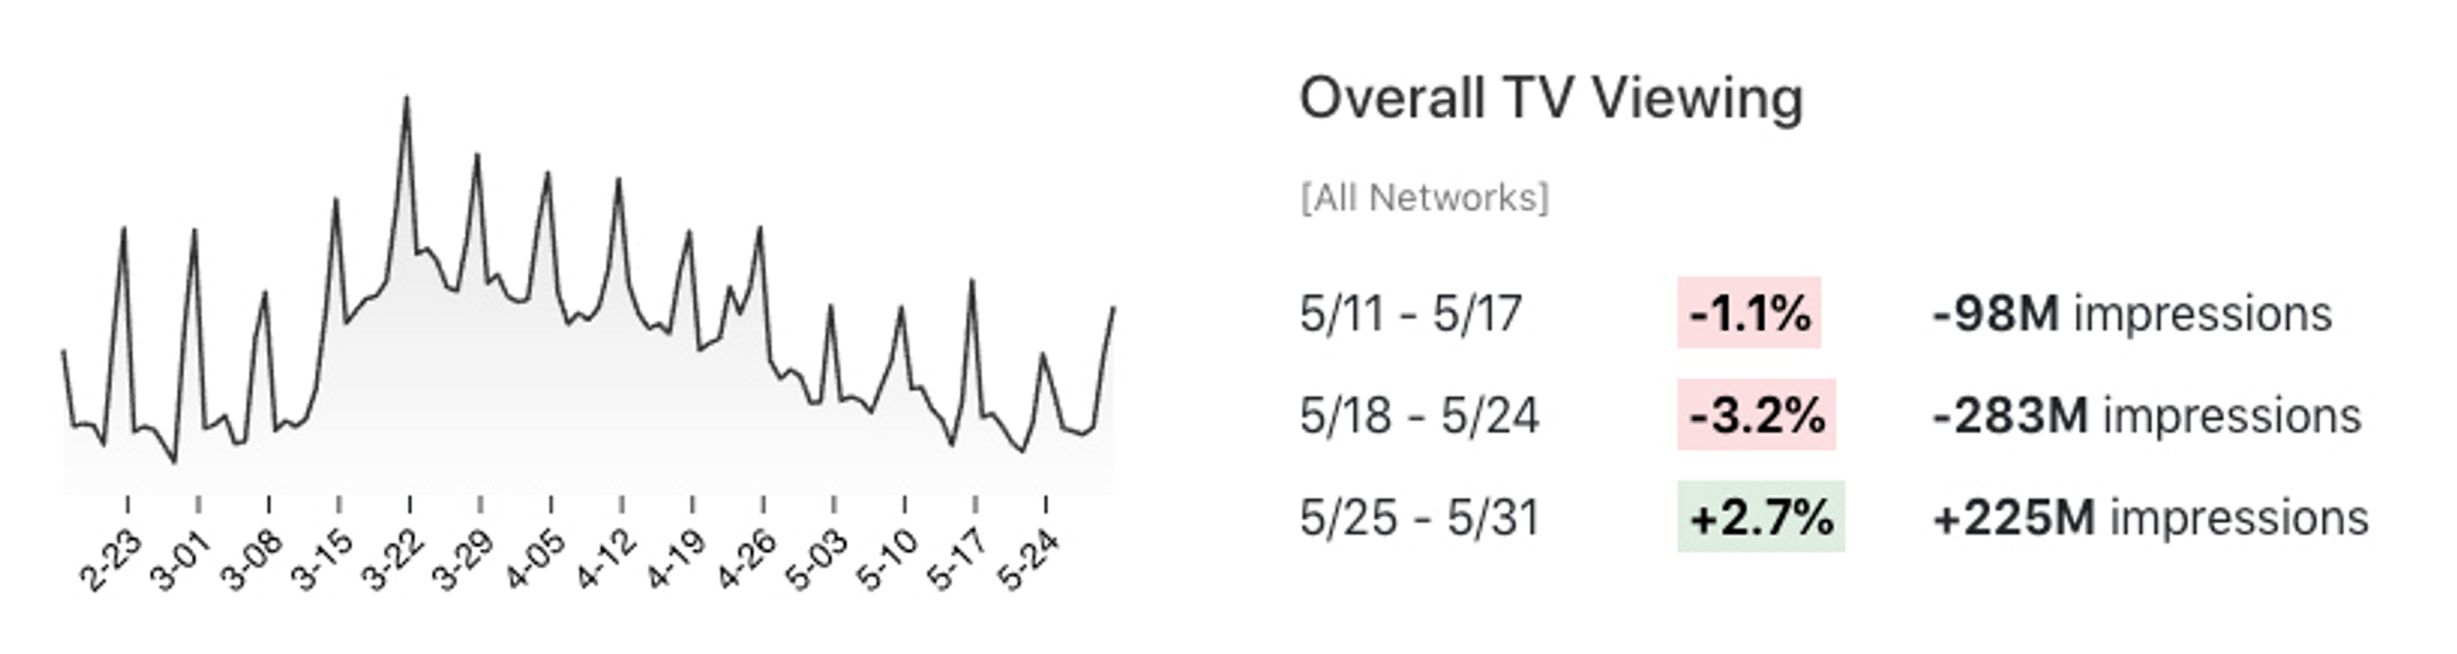 Overall TV viewing changes in May 2020.